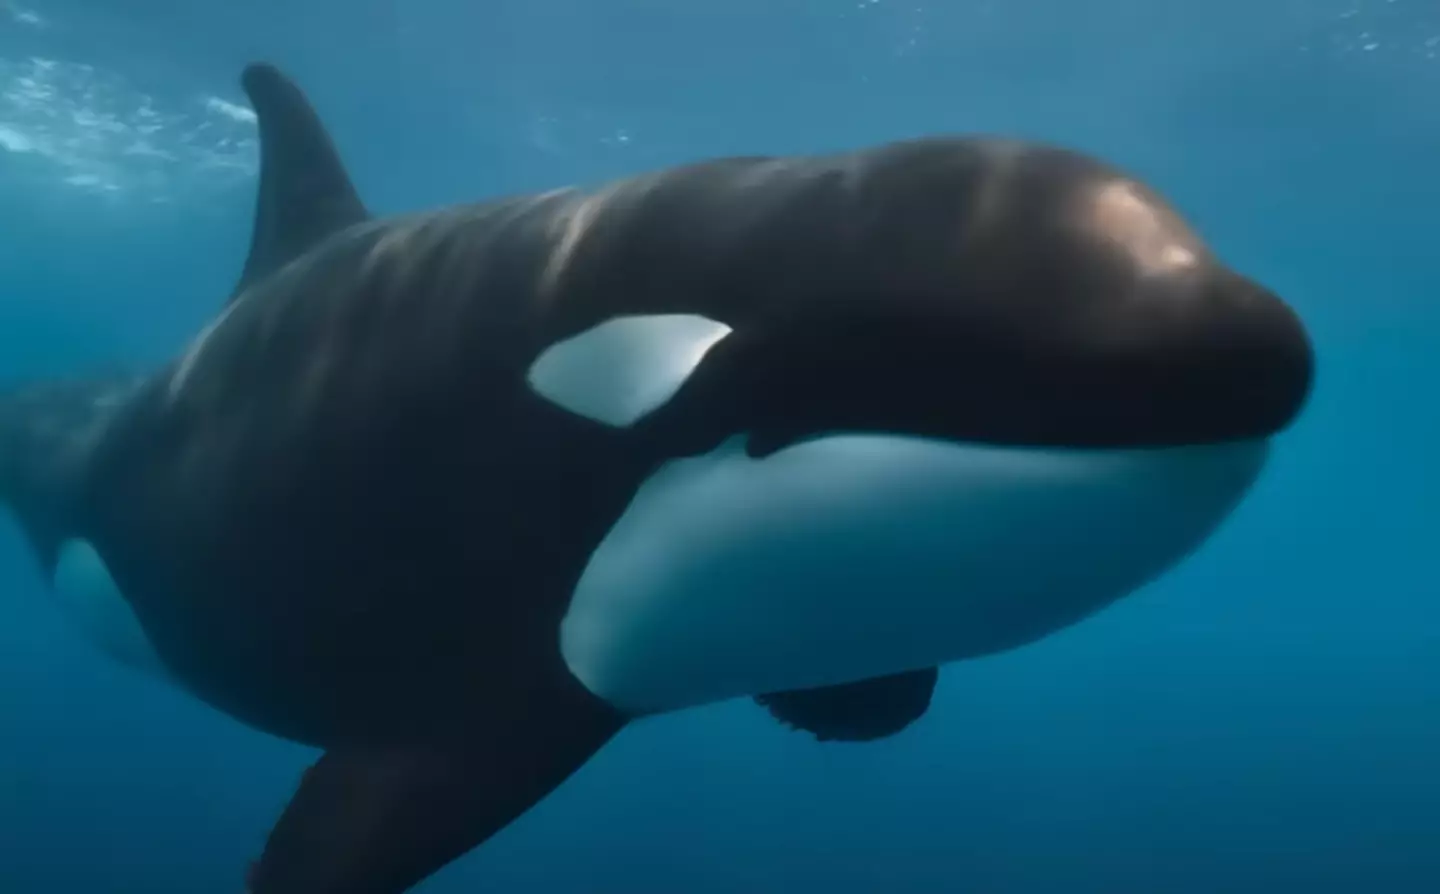 The video shows the killer whale swimming up to the shark before ramming it head first.